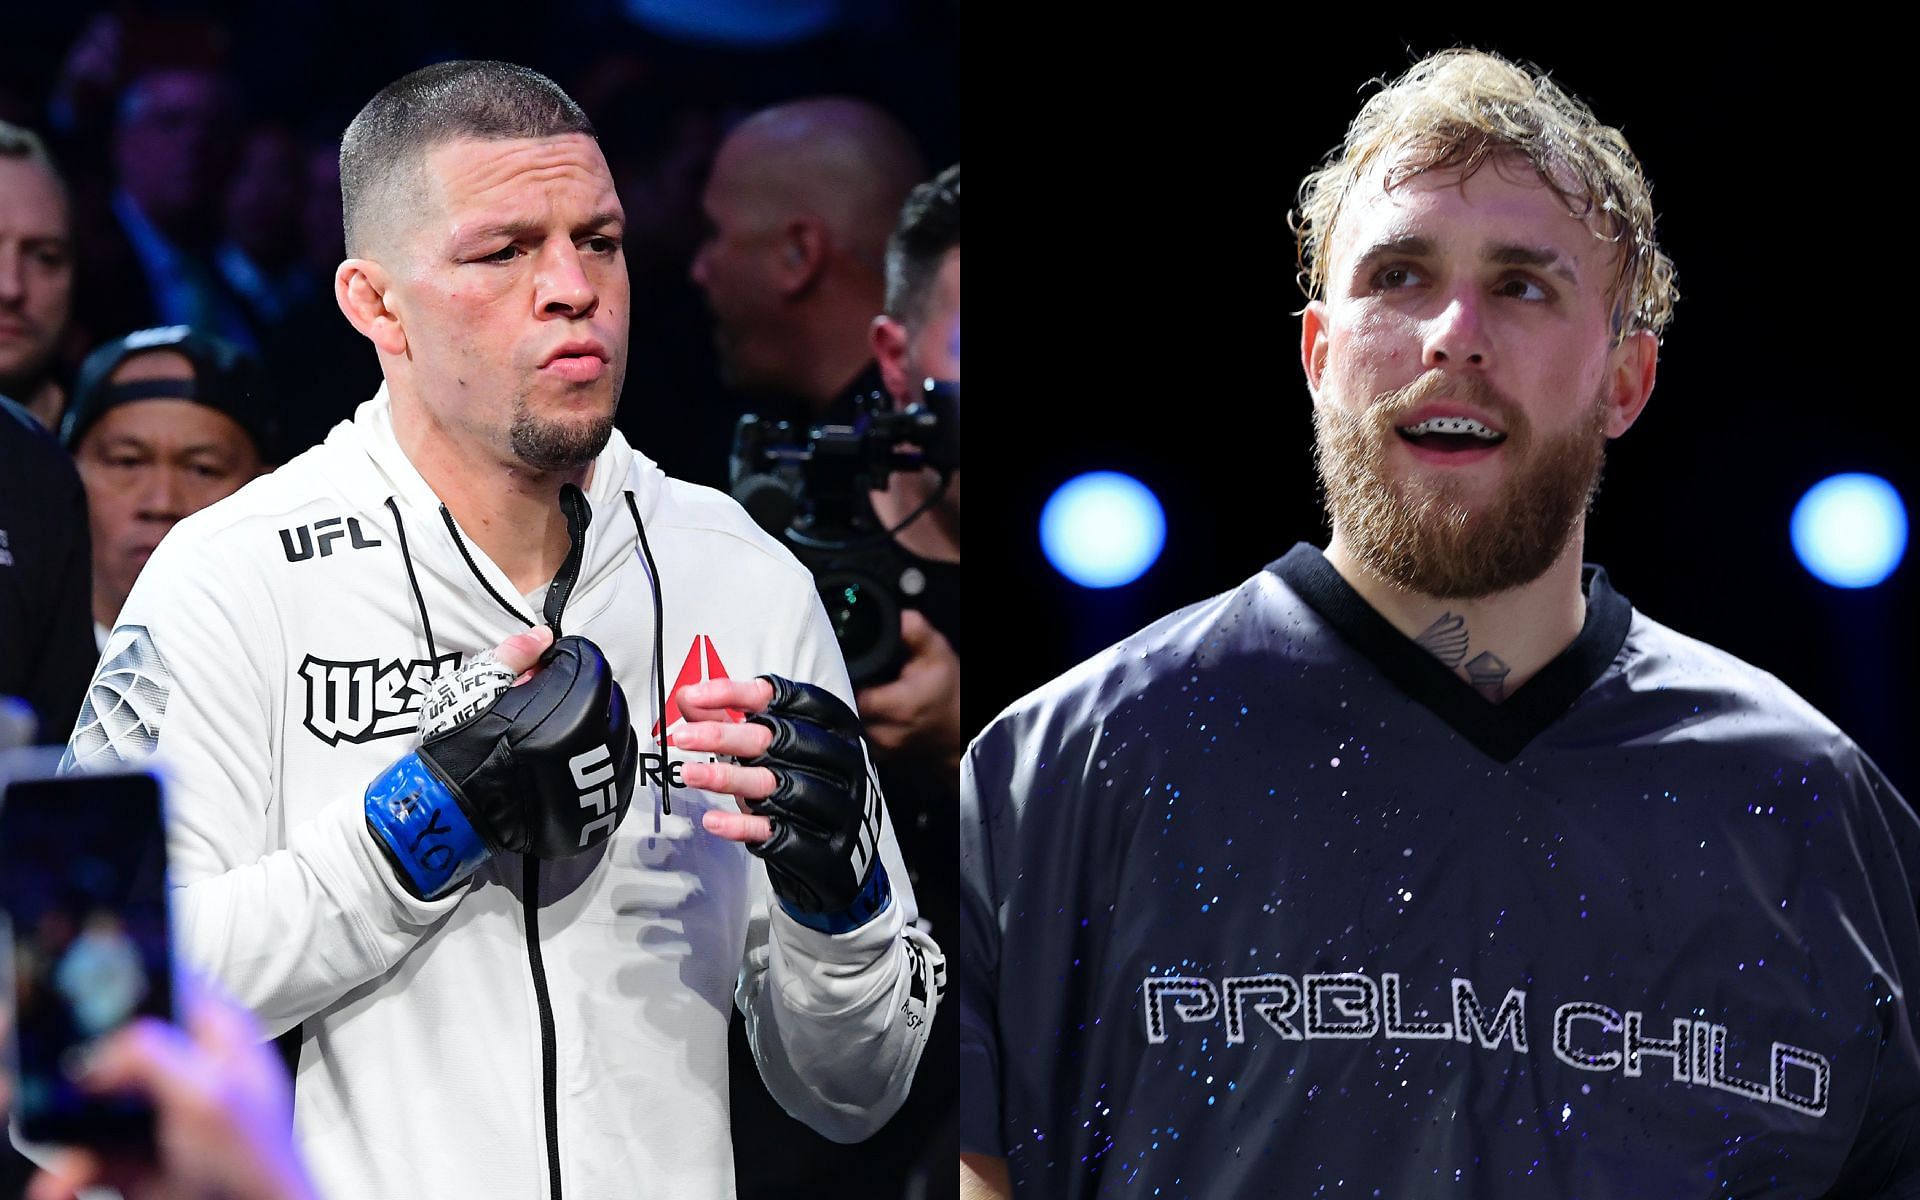 Nate Diaz and Jake Paul [Image credits: Getty Images]